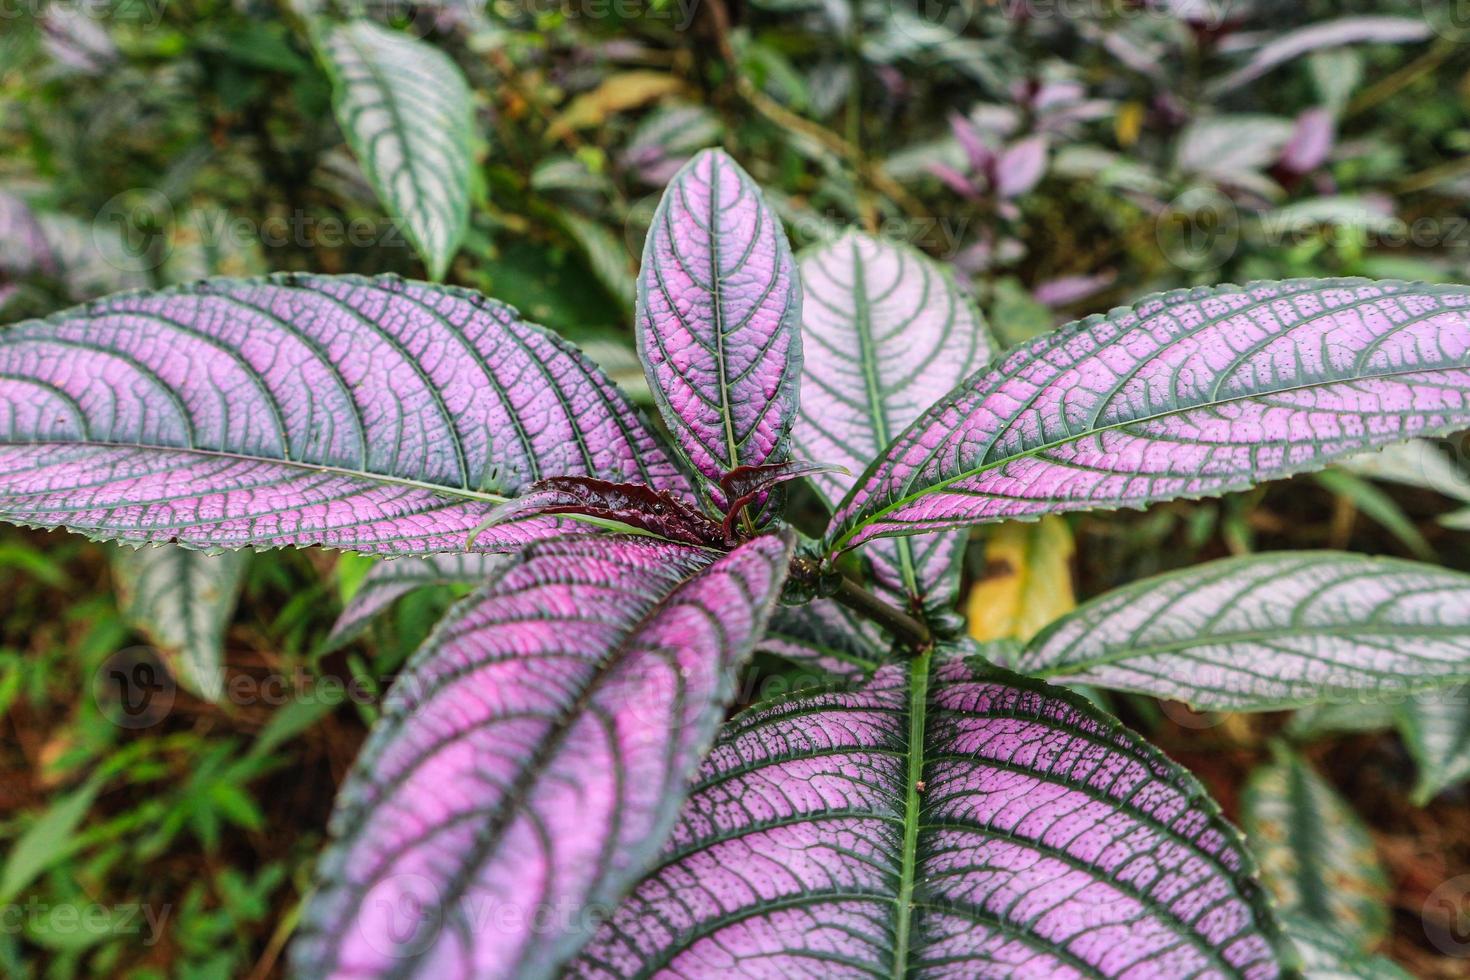 Persian Shield displaying it's vibrant shades of purple and green in Indonesian Forest photo